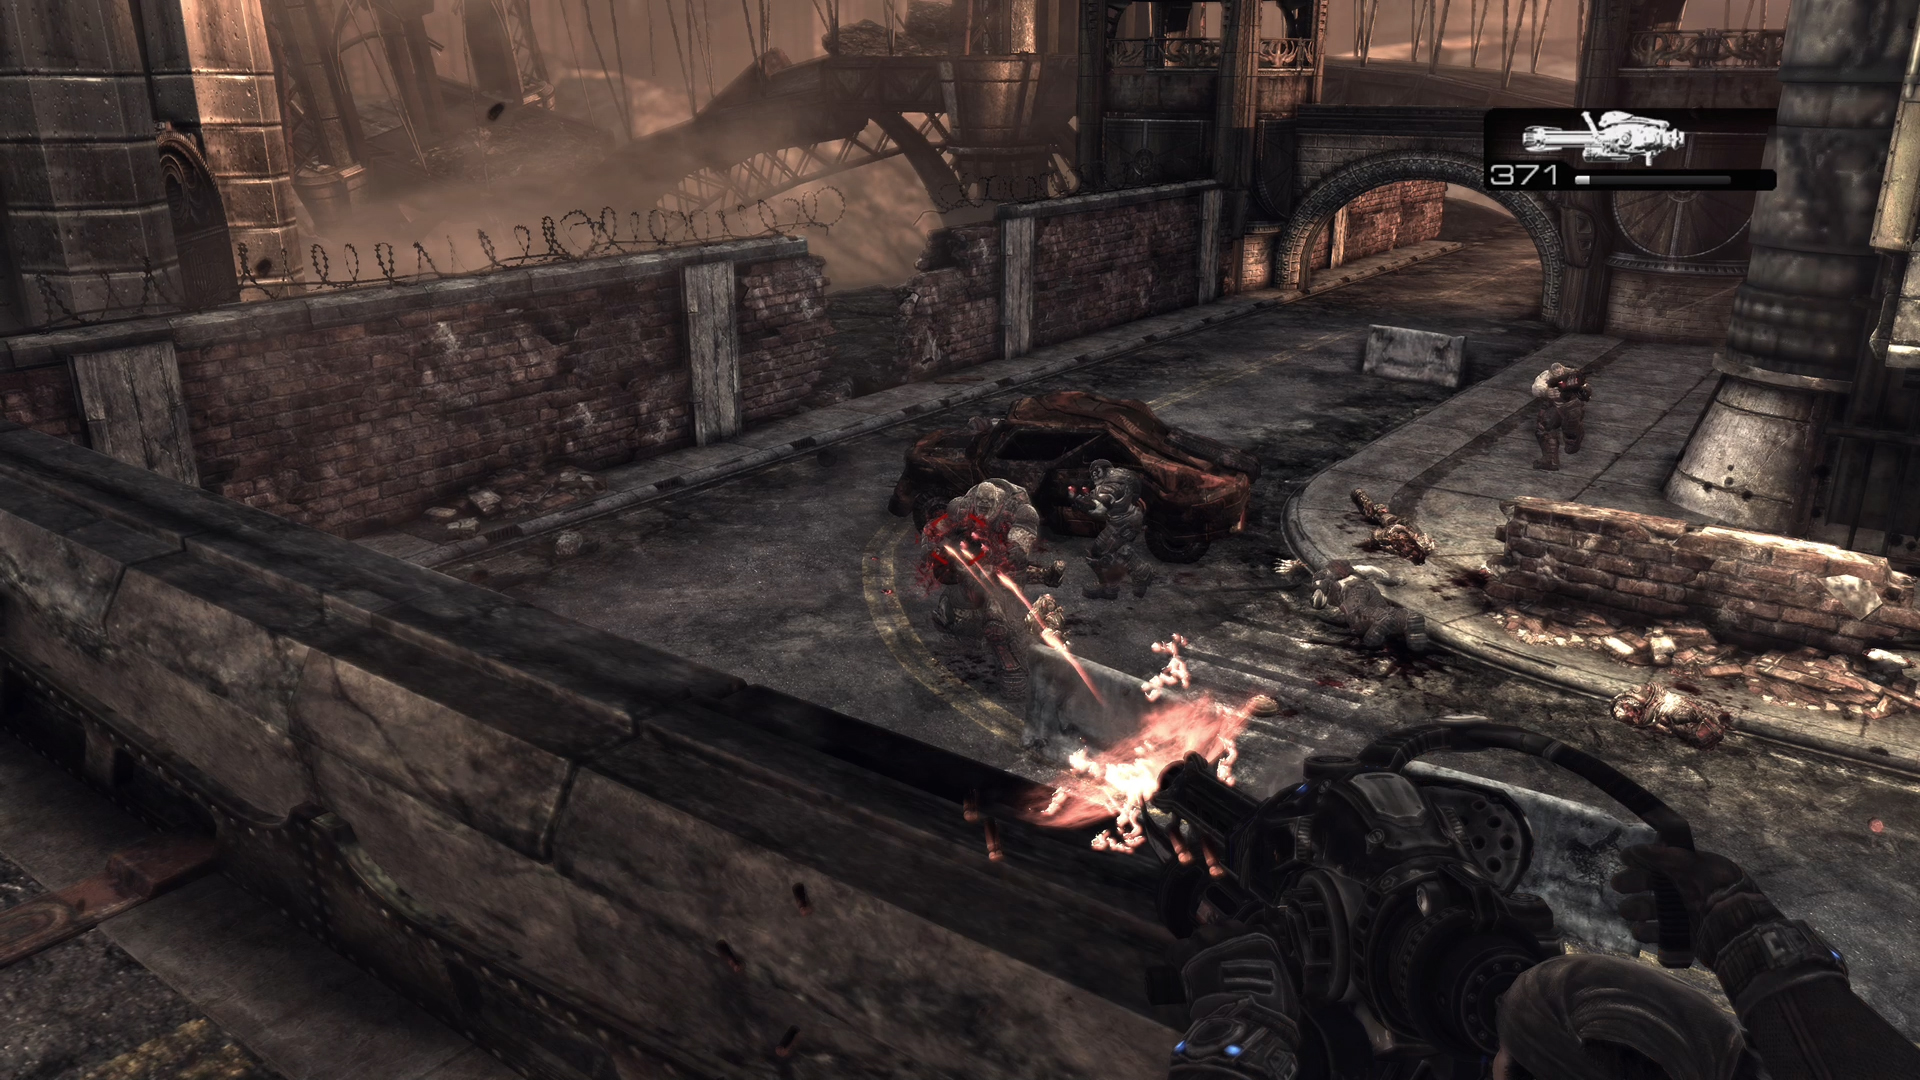 Does Gears of War 2 have Crossplay?